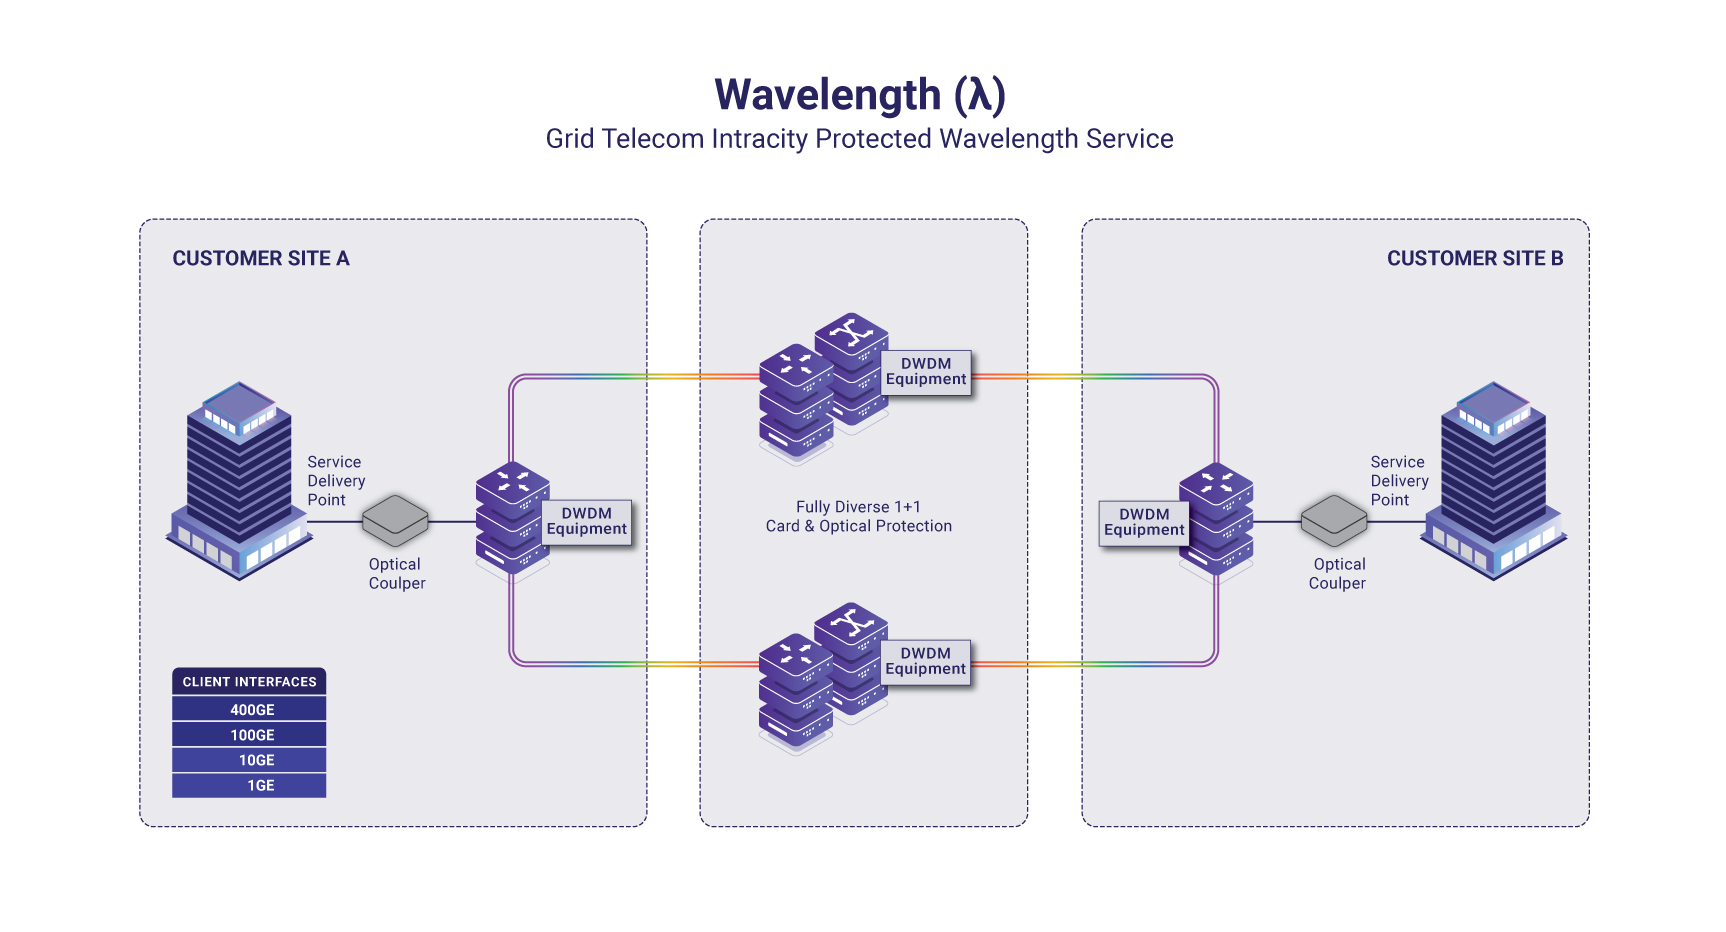 Grid Telecom Intracity Network Protected Wavelength Service